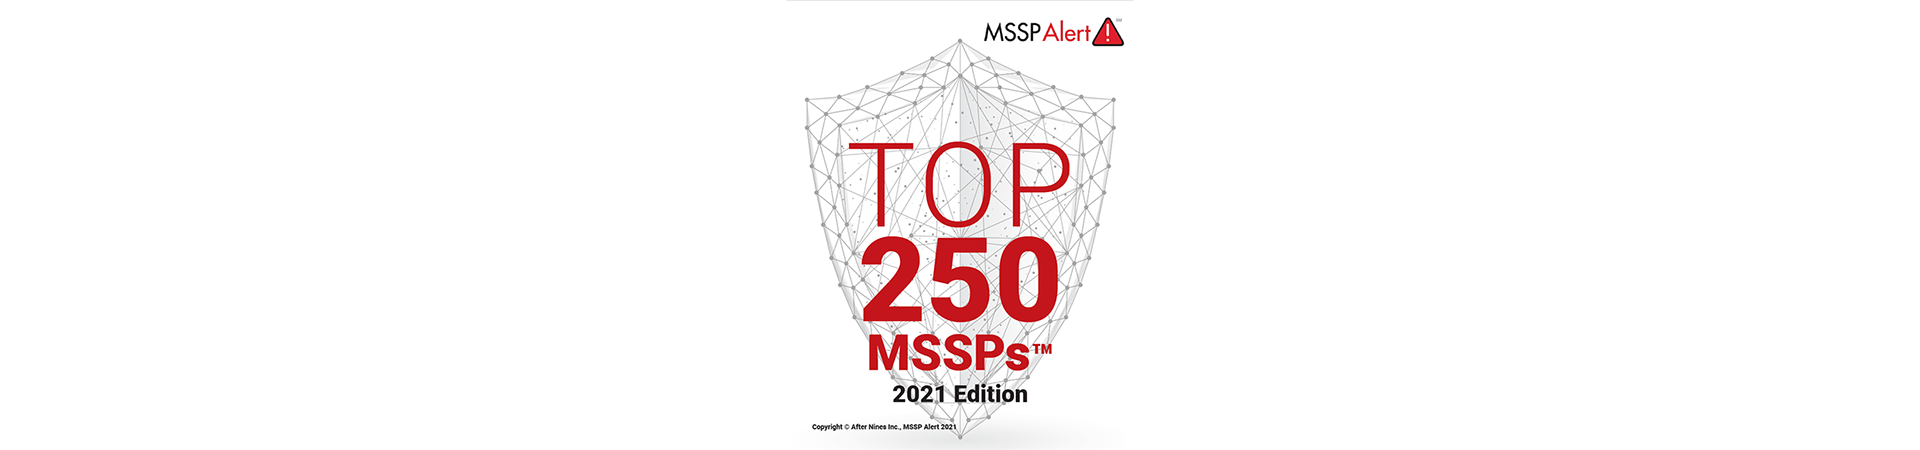 TOP 250 MSSps 2021 Edition